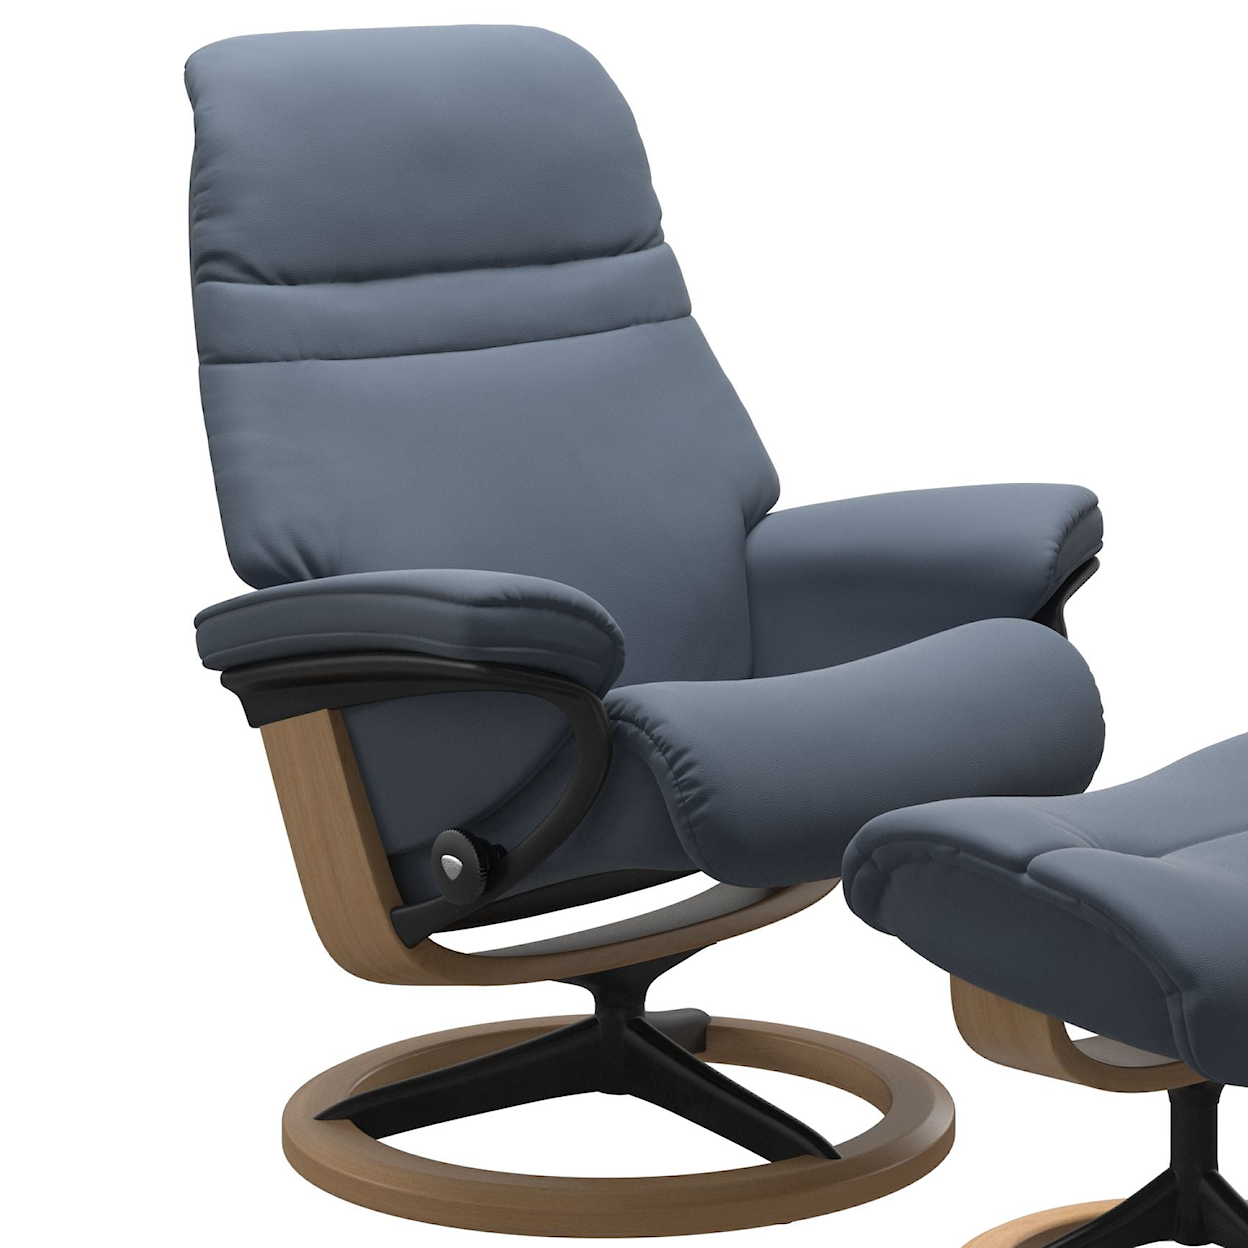 Stressless by Ekornes Sunrise Small Reclining Chair with Signature Base